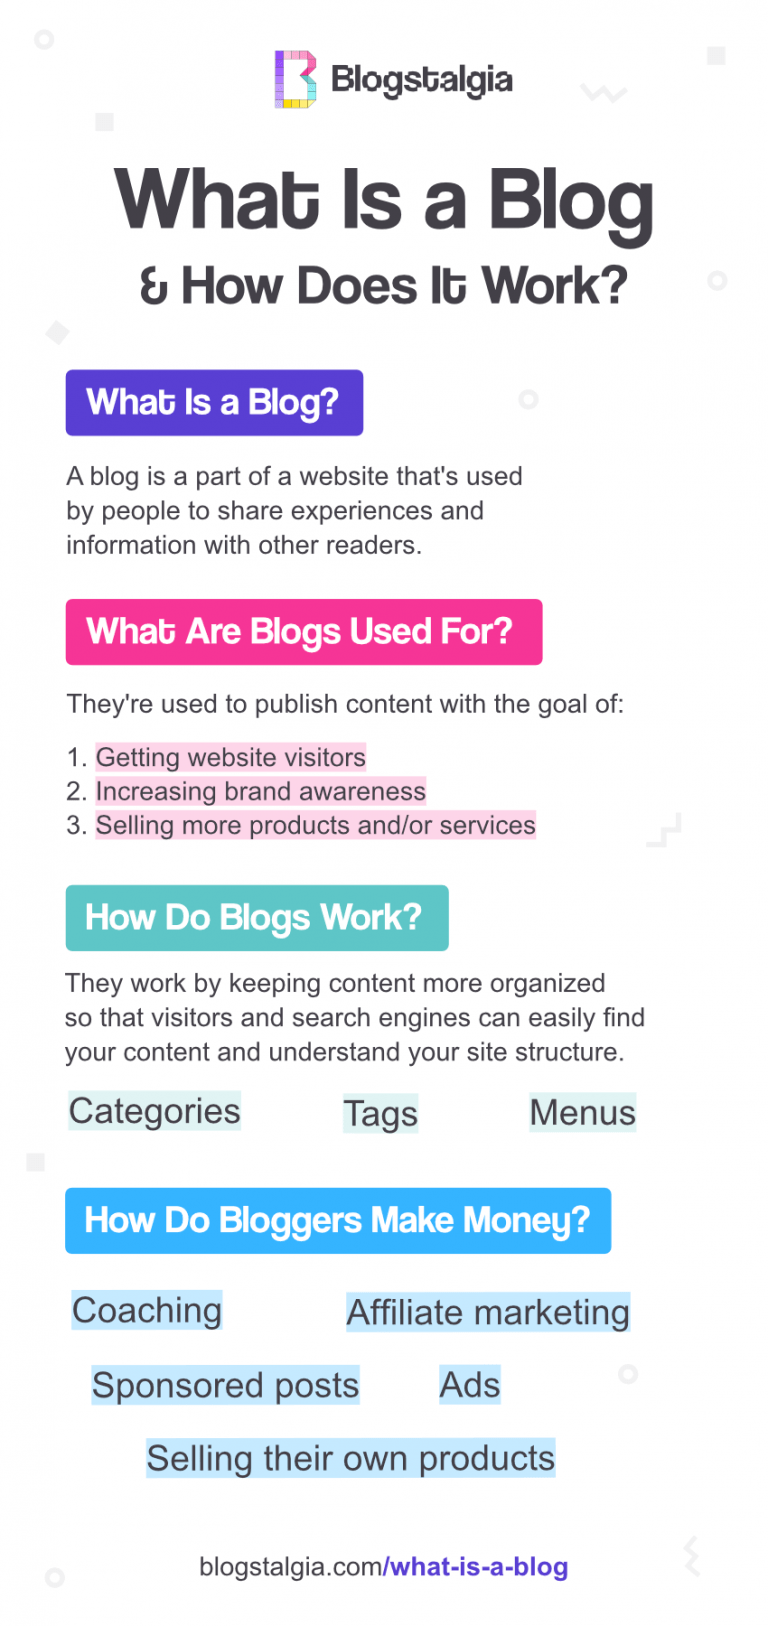 What Is a Blog and How Does It Work? – Blogstalgia